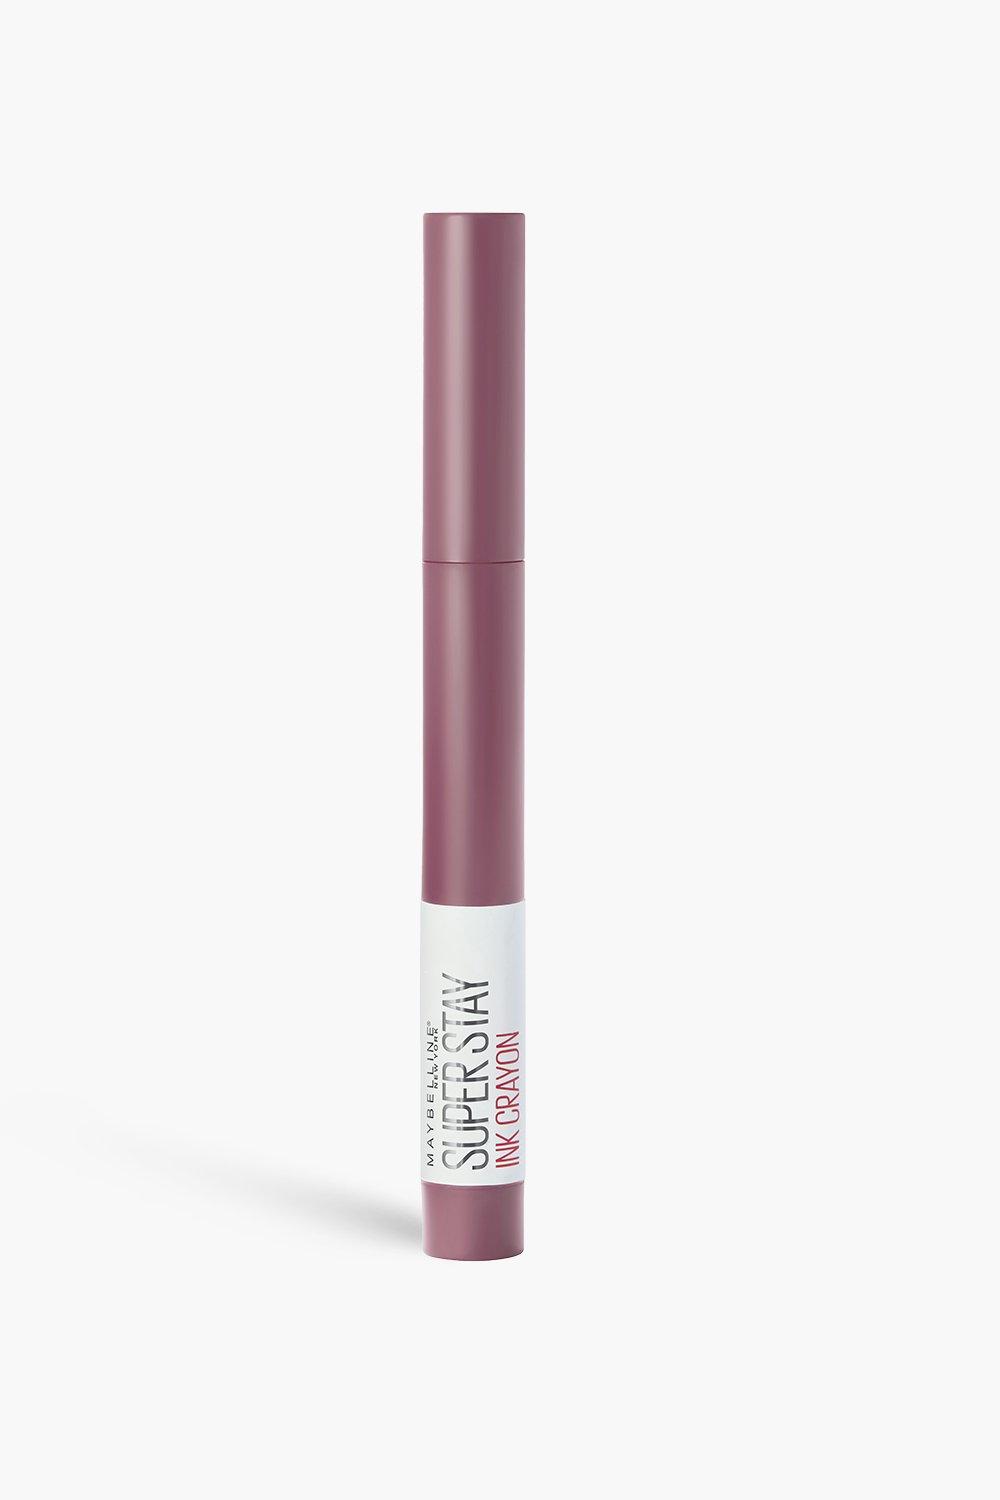 Maybelline Superstay Matte Crayon Lipstick, 25 Stay Exceptional